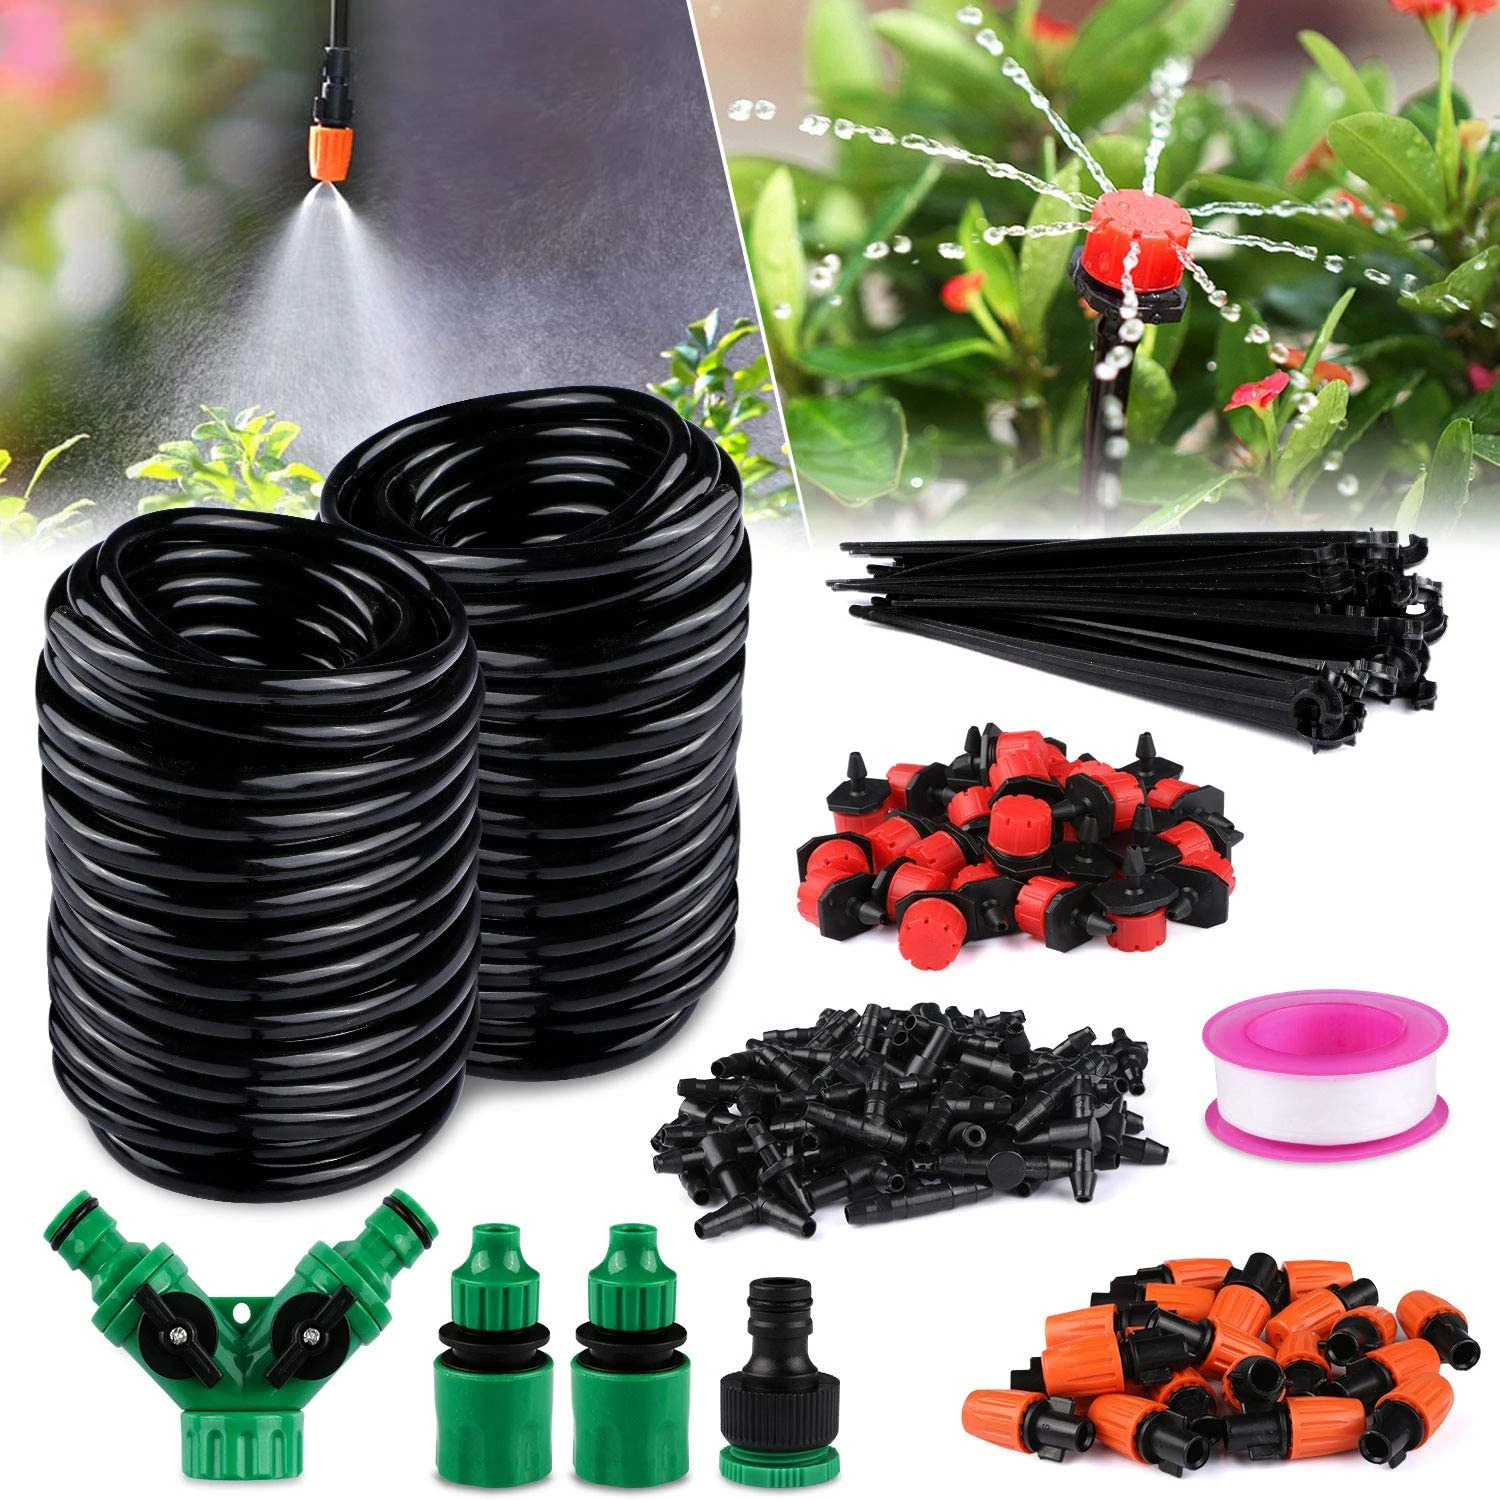 Garden Smart Automatic Plant Watering Adjustable Drain Irrigation System China Other Watering & Irrigation 0-0.4mpa PVC